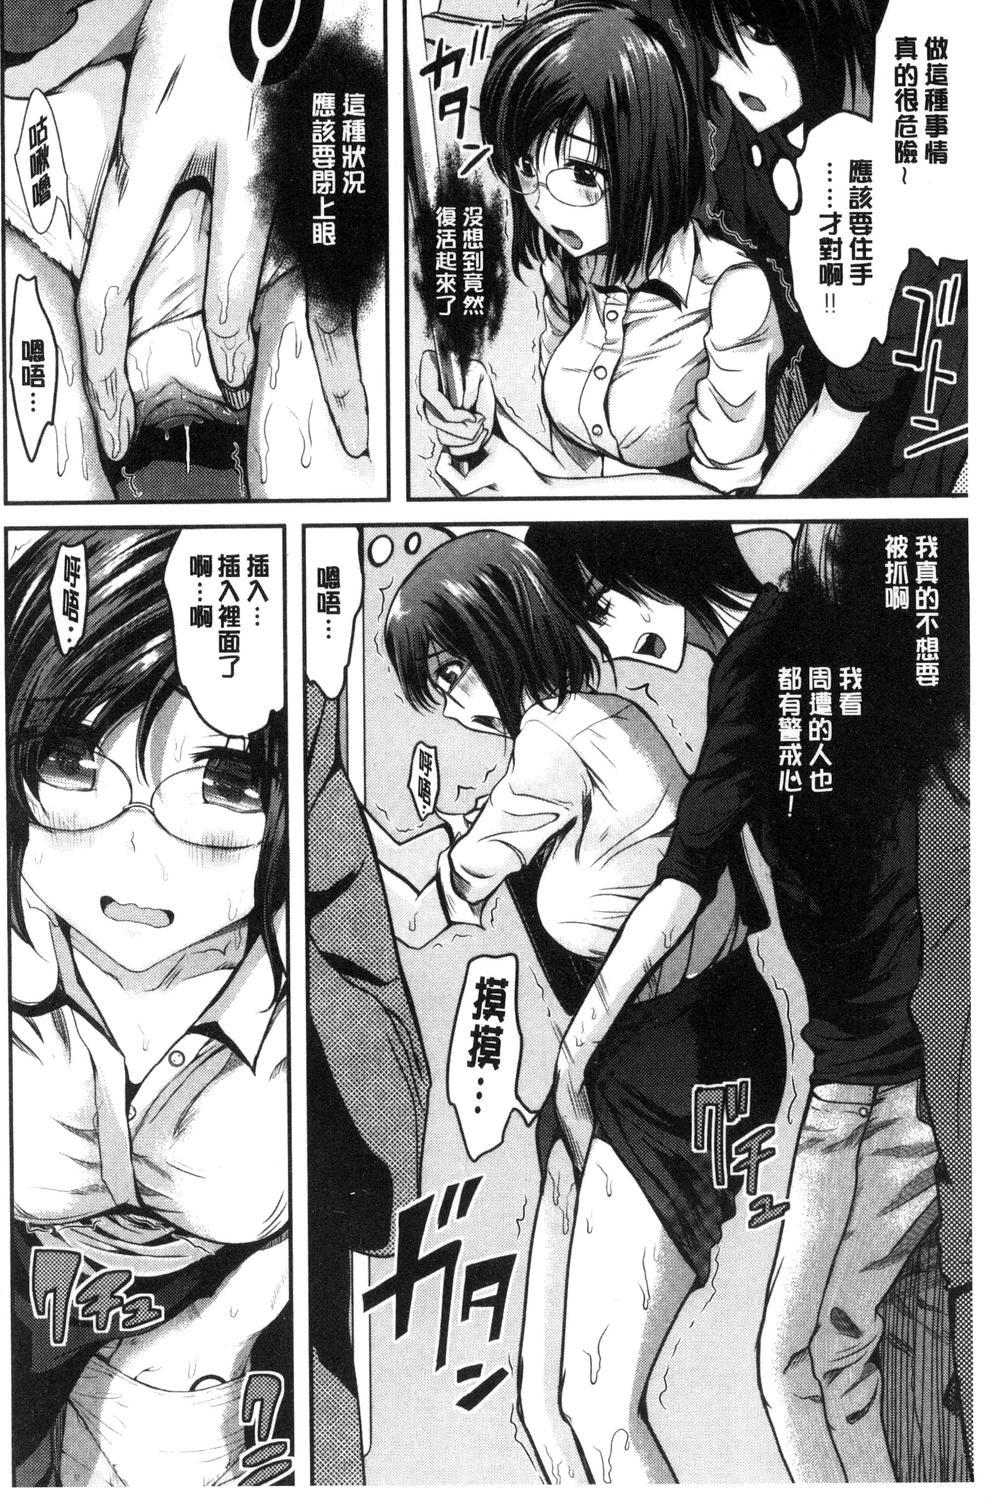 Straight オレの左手が美女を喰いまくる（chinese） Perverted - Page 5